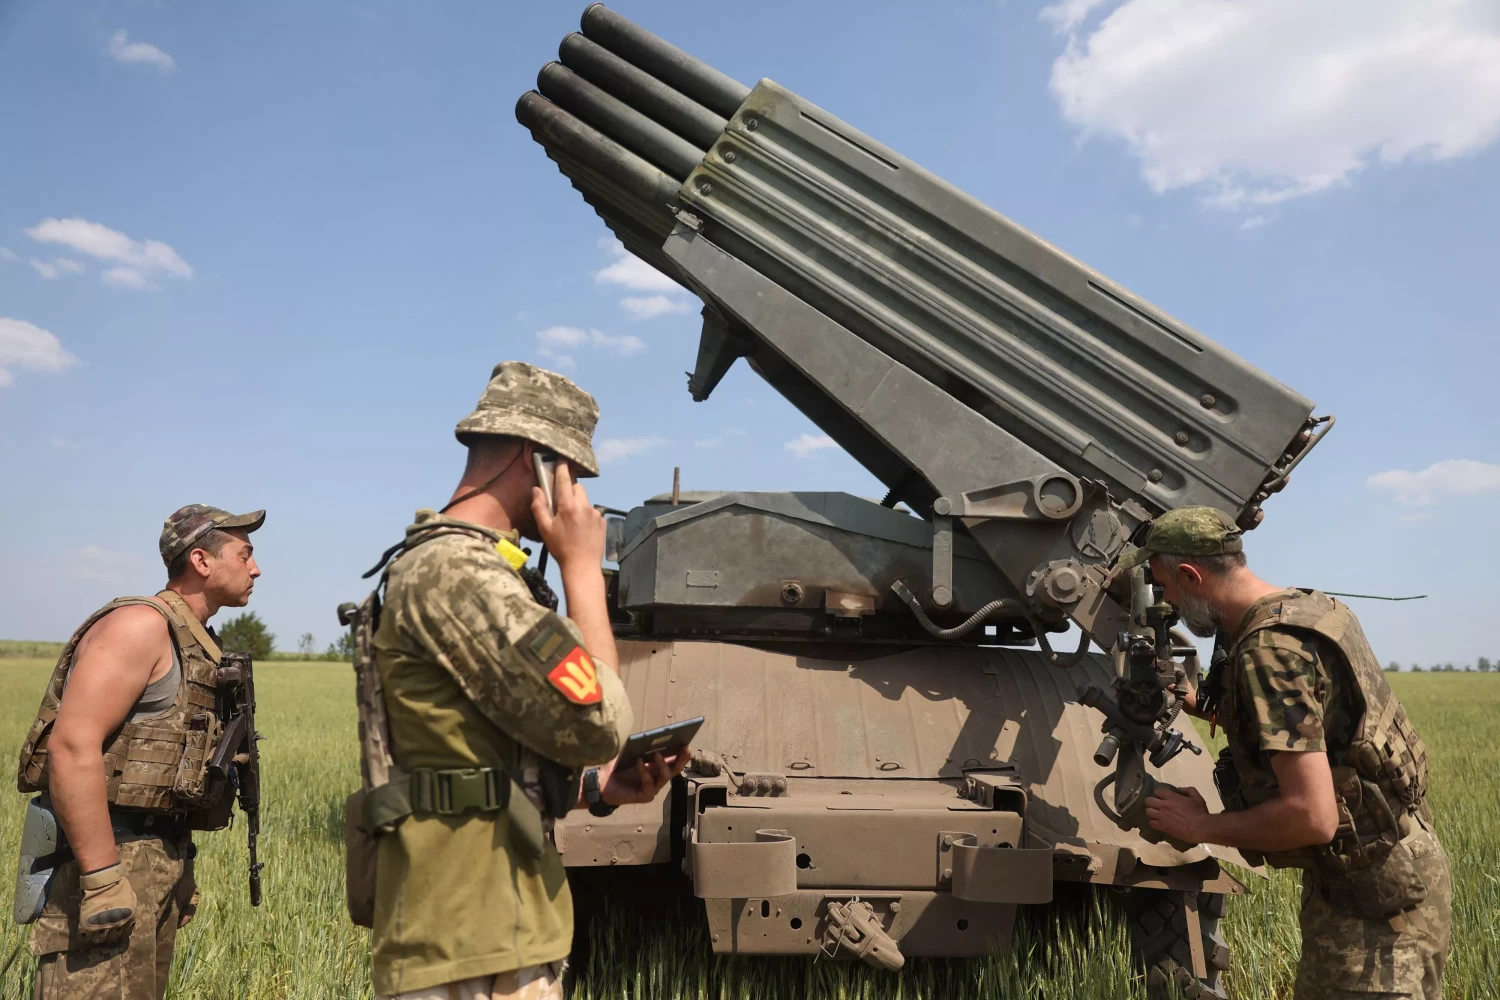 Ukrainian artillerymen prepare to fire a BM-21 Grad multiple rocket launcher near Izyum, south of Kharkiv, on June 11, 2022. Ukraine has called for an urgent delivery of western supplied arms. ANATOLII STEPANOV/GETTY IMAGES